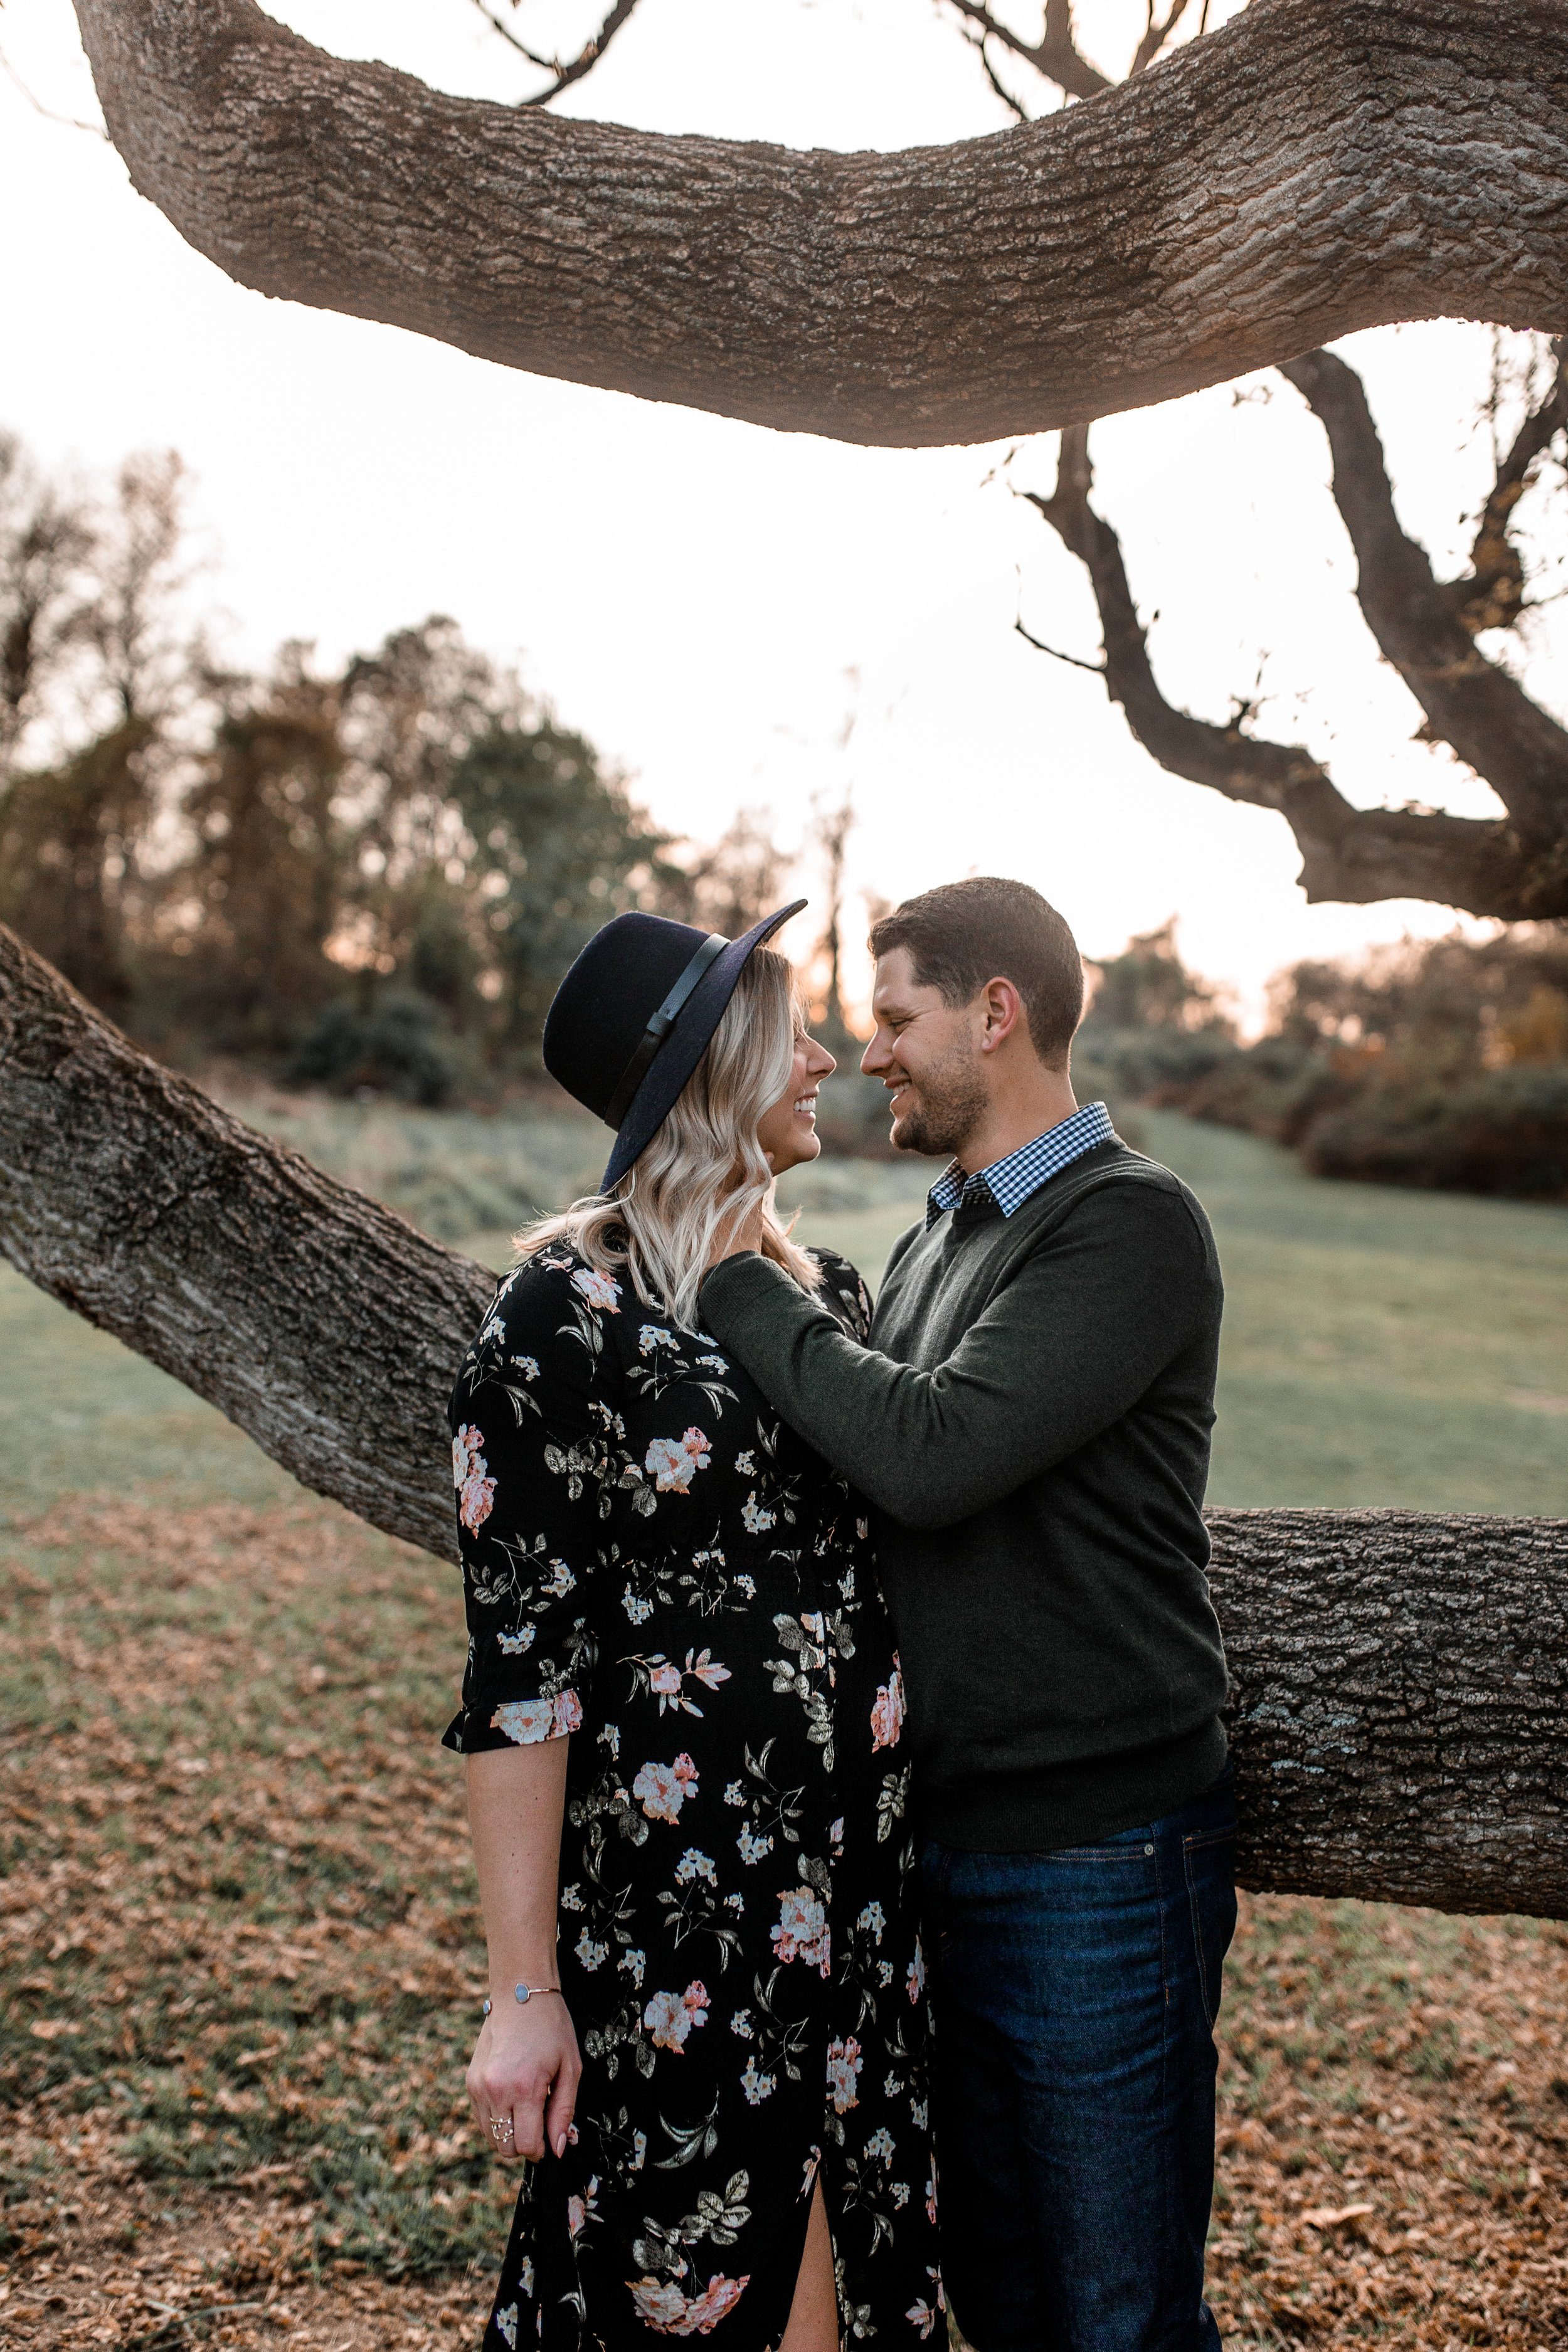 nicole-daacke-photography-carefree-bohemian-lancaster-pa-pennsylvania-engagement-photos-engagement-session-golden-sunset-adventure-session-in-lancaster-pa-lancaster-pa-outdoor-wedding-photographer-23.jpg